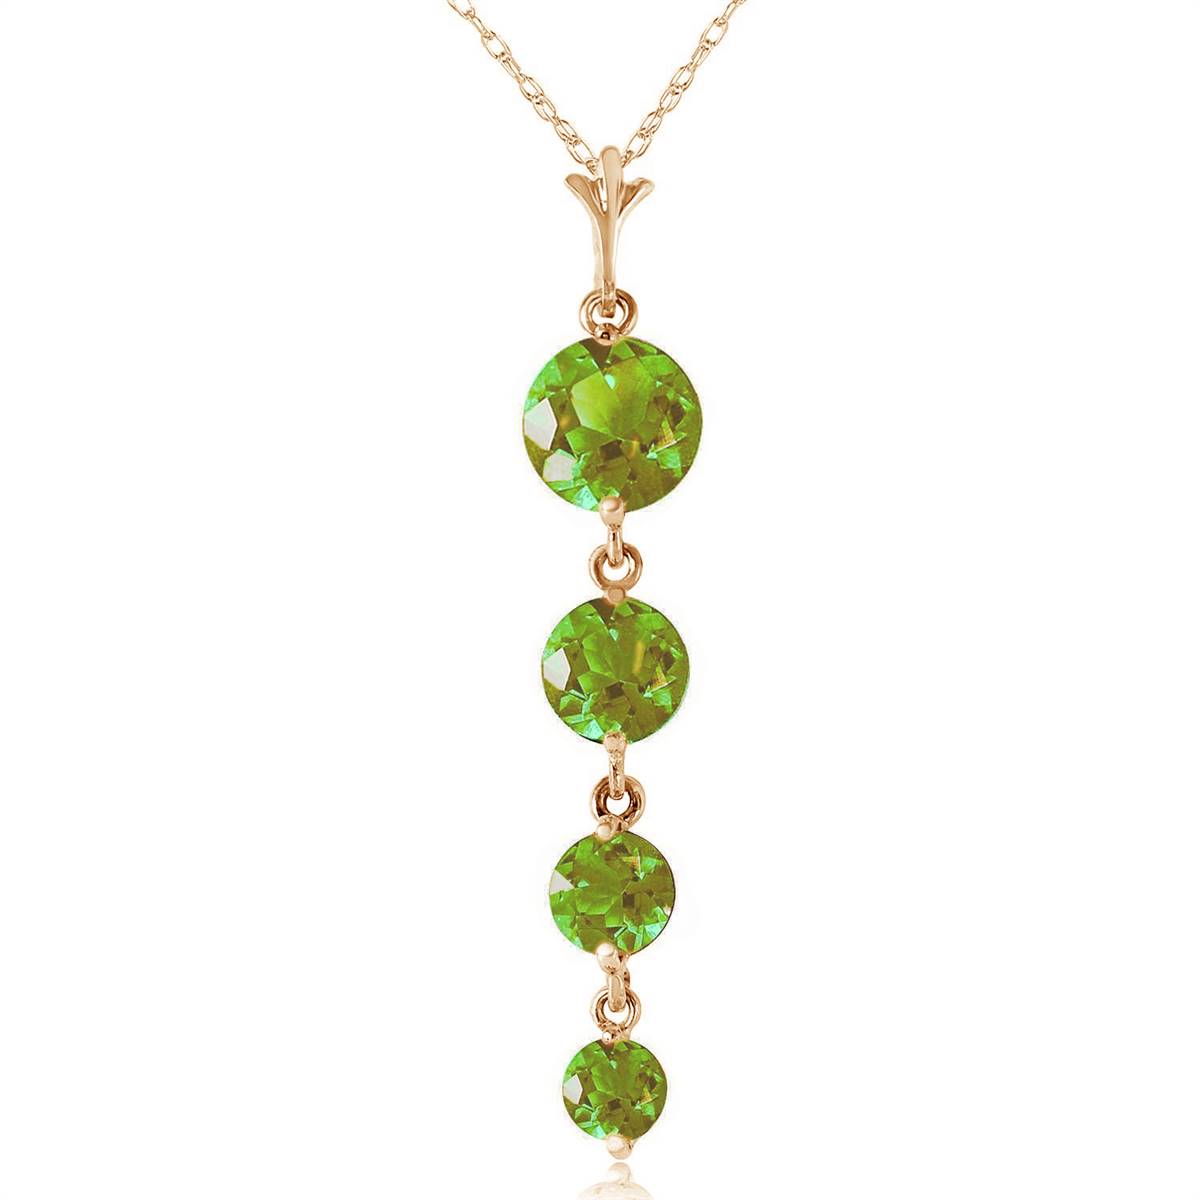 3.9 Carat 14K Solid Yellow Gold Crossing The Bar Peridot Necklace